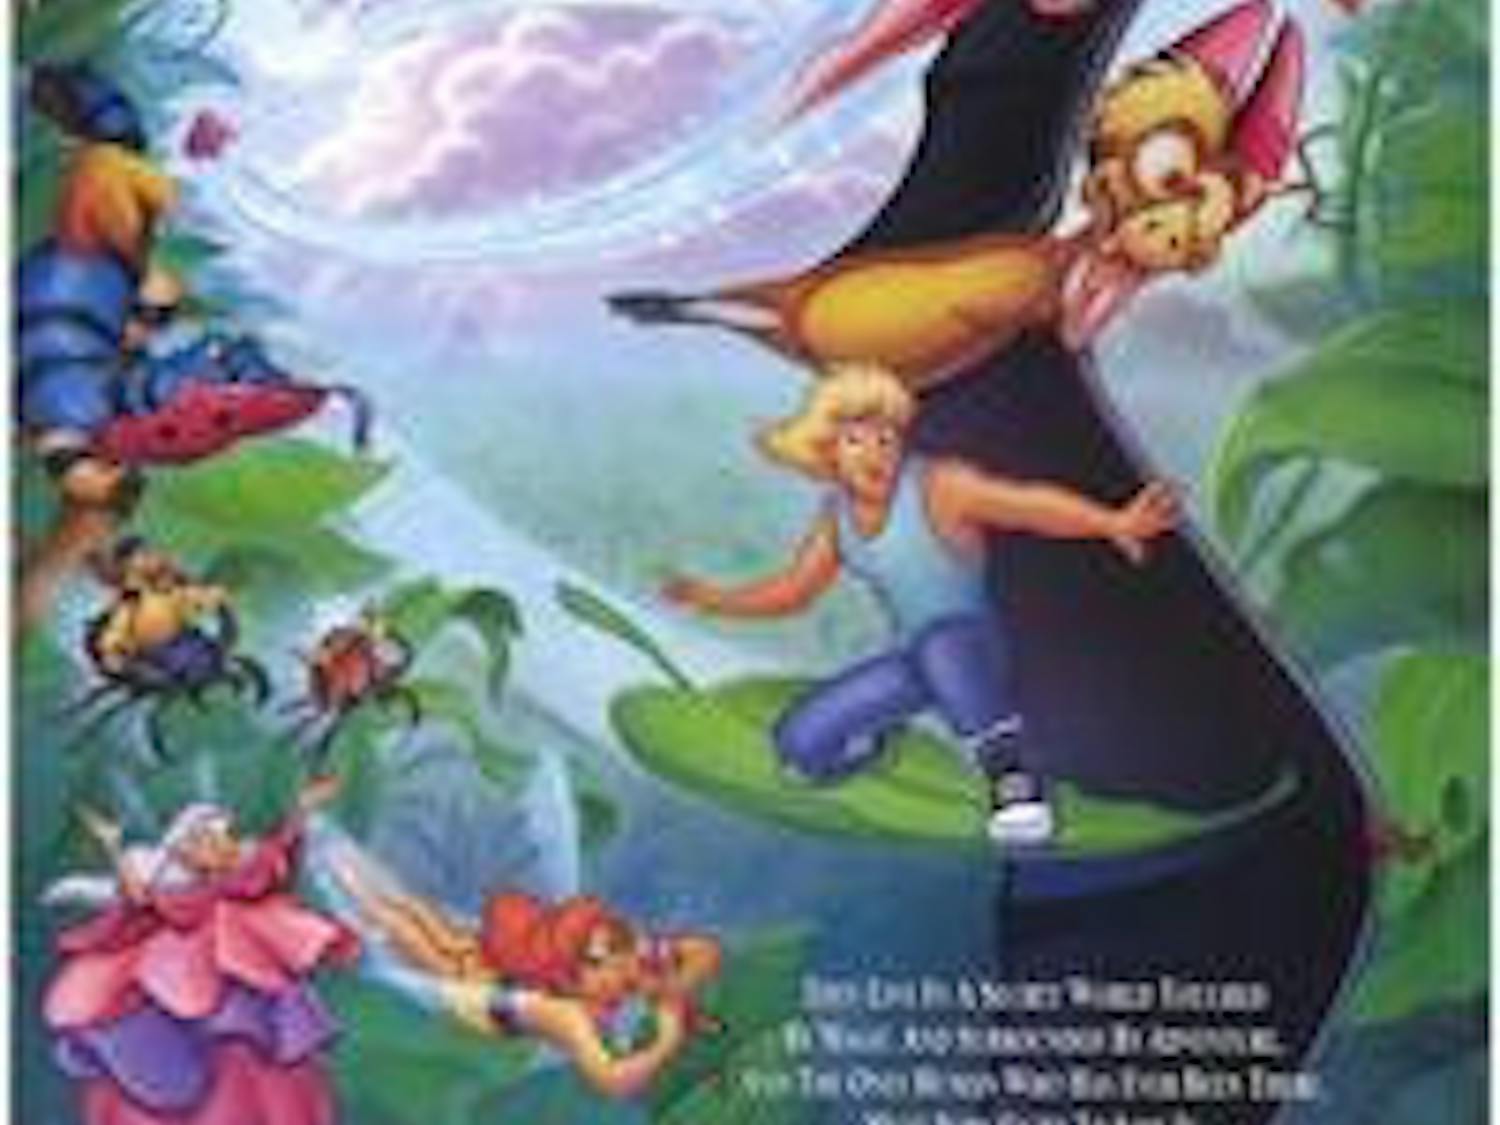 The fairy world of “FernGully,” released in 1992, captured the hearts and imaginations of many children.